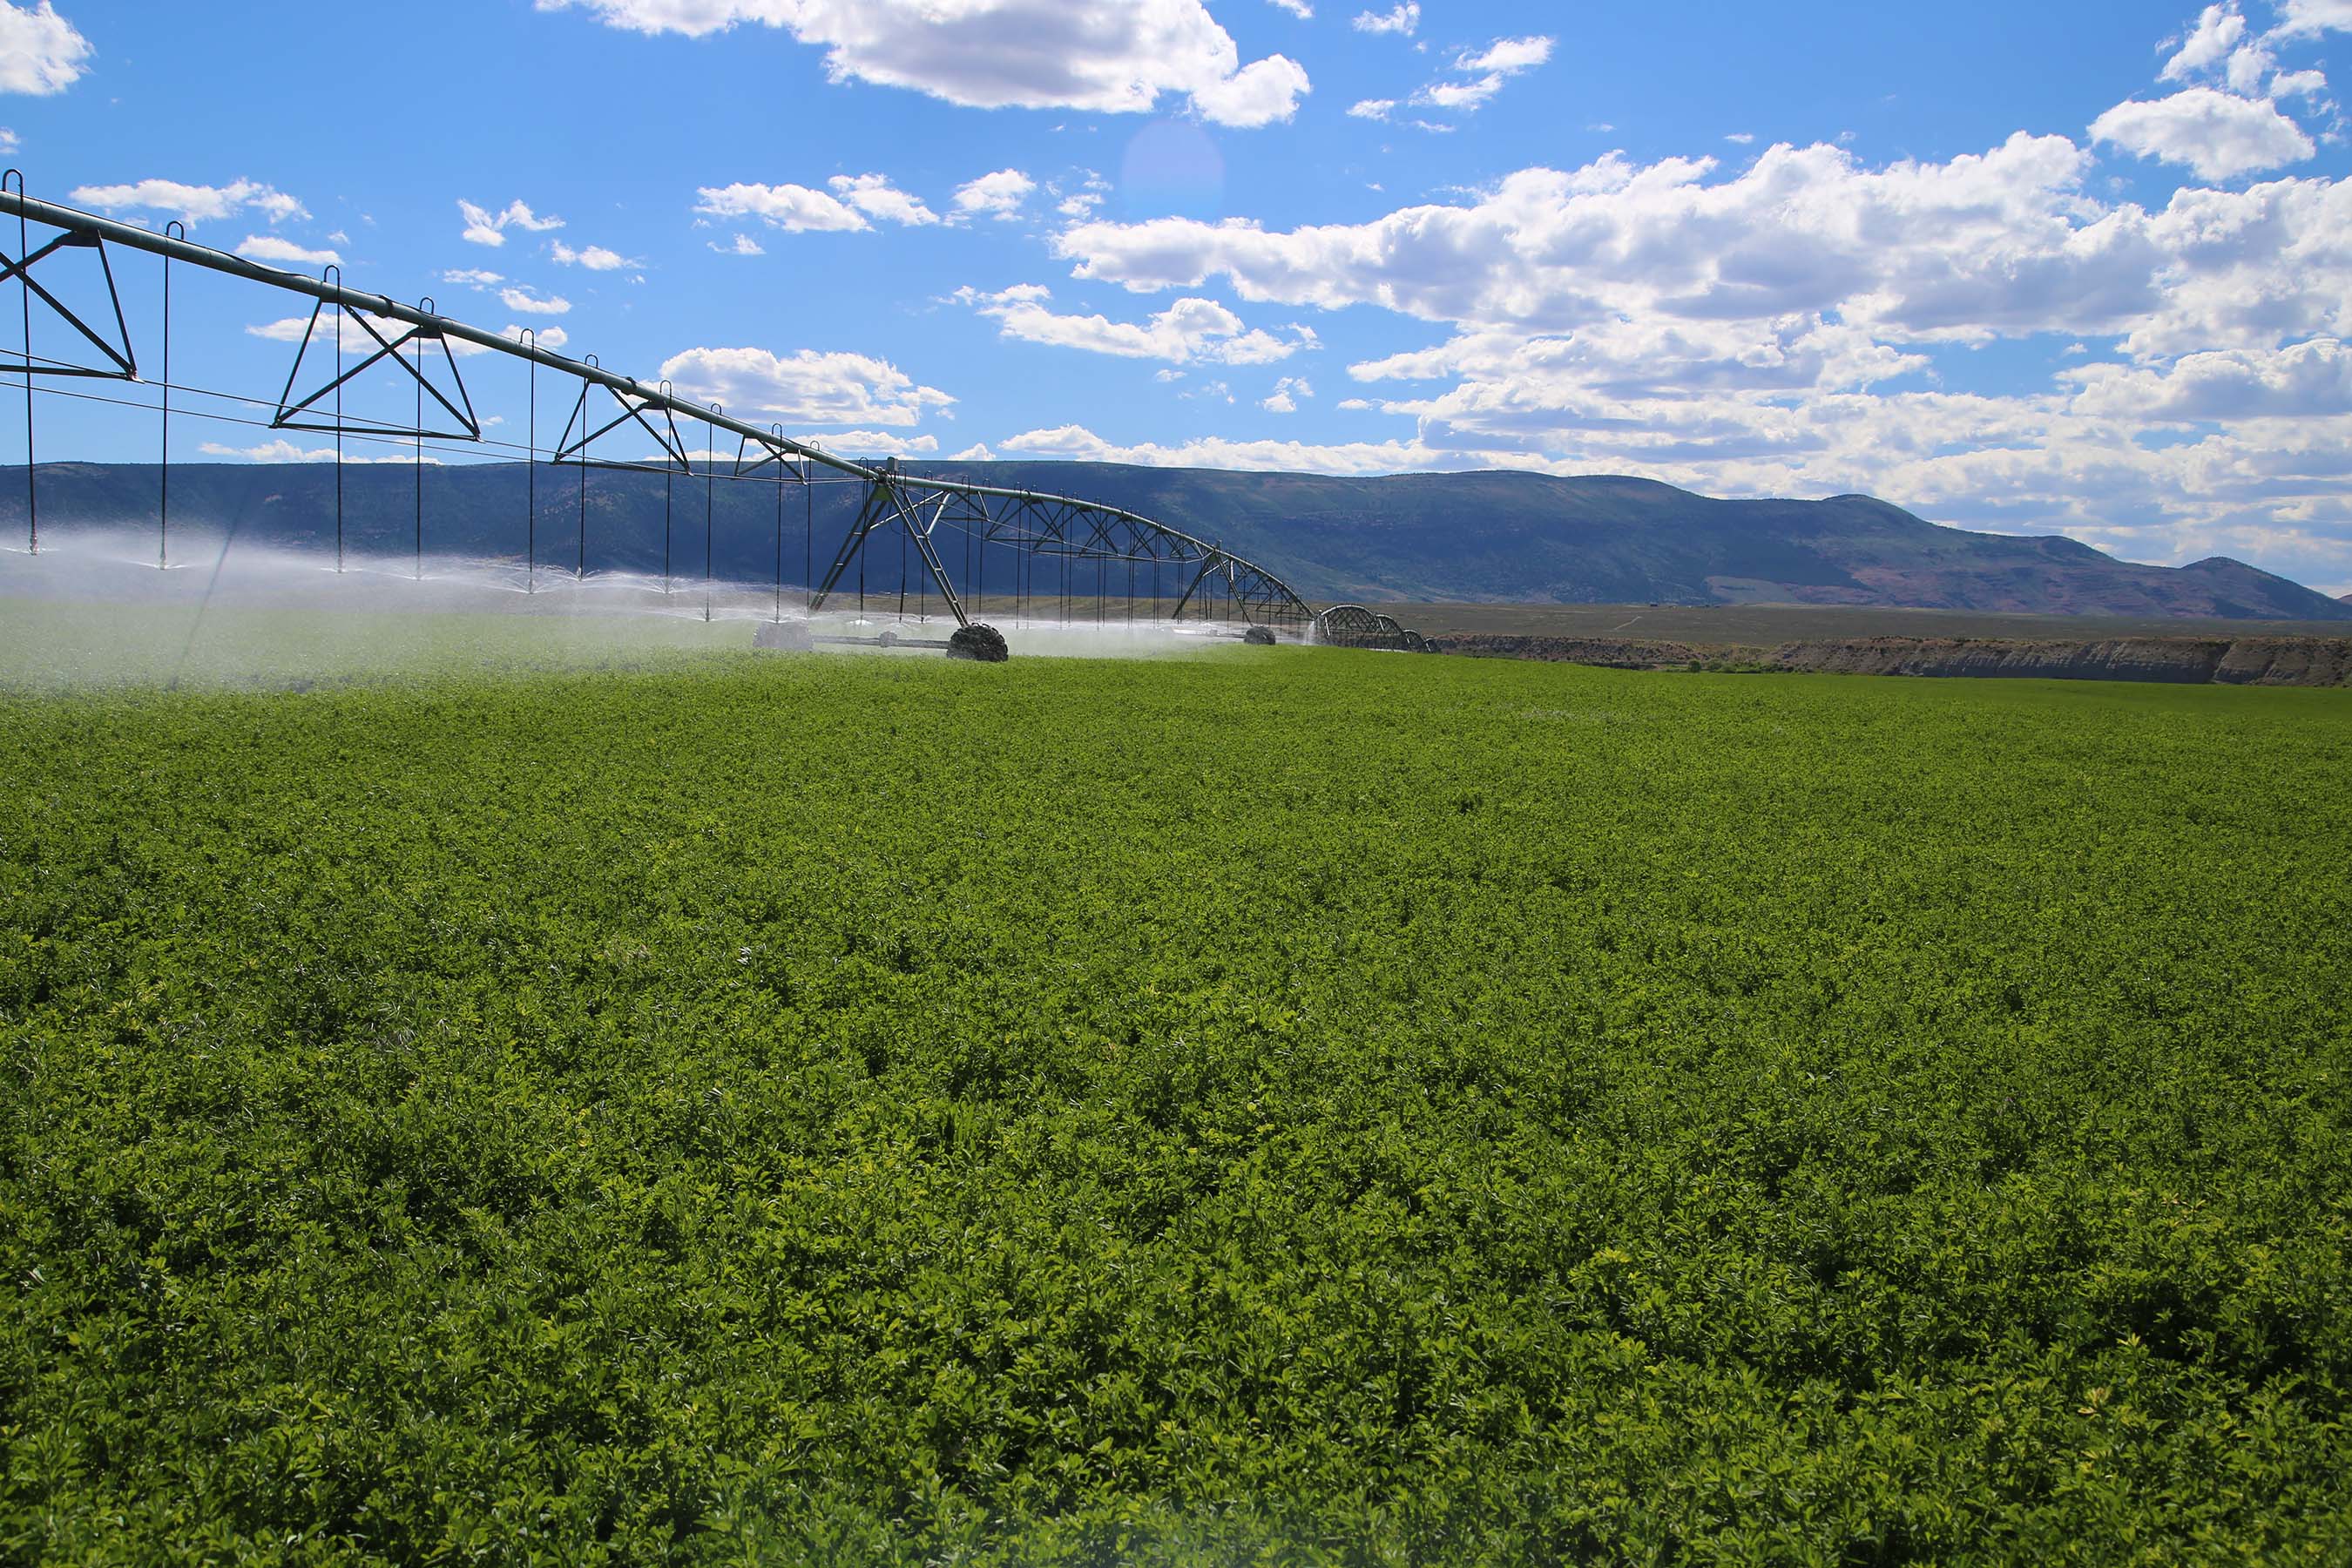 Valuable and historic water rights that irrigate hundreds of acres of meadows rest alongside the rivers. The rights are recognized as some of the most senior water rights on Yampa River Basin.